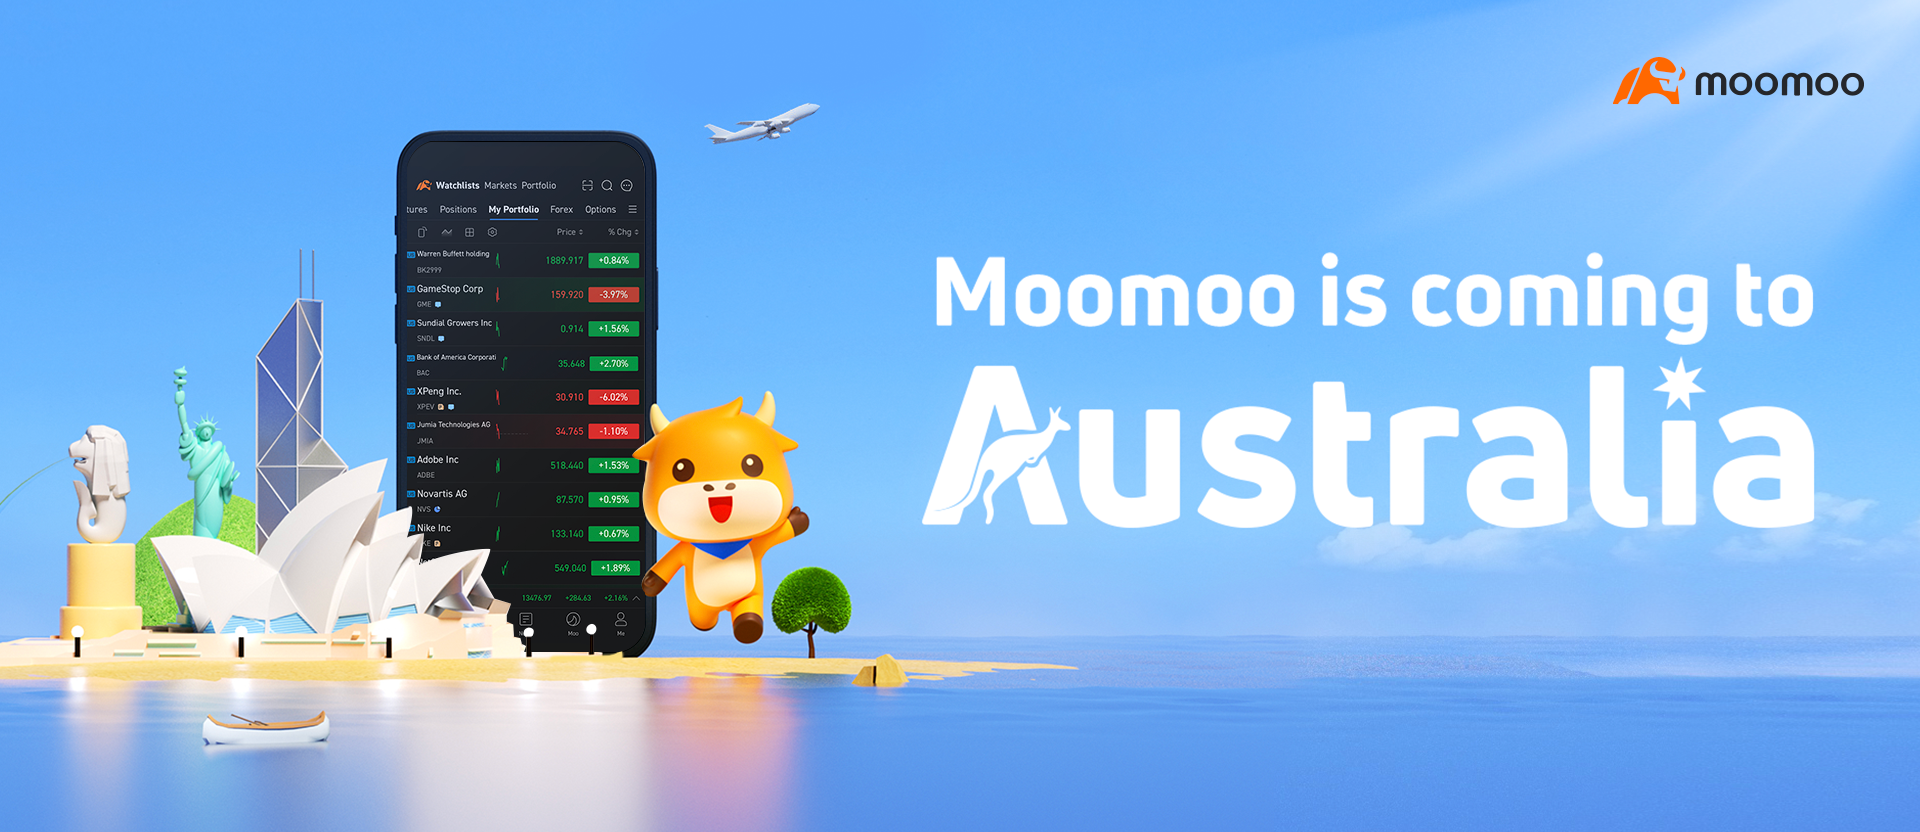 Moomoo to Launch in Australia: Will Offer Australian Investors One-Stop Online Investment Services